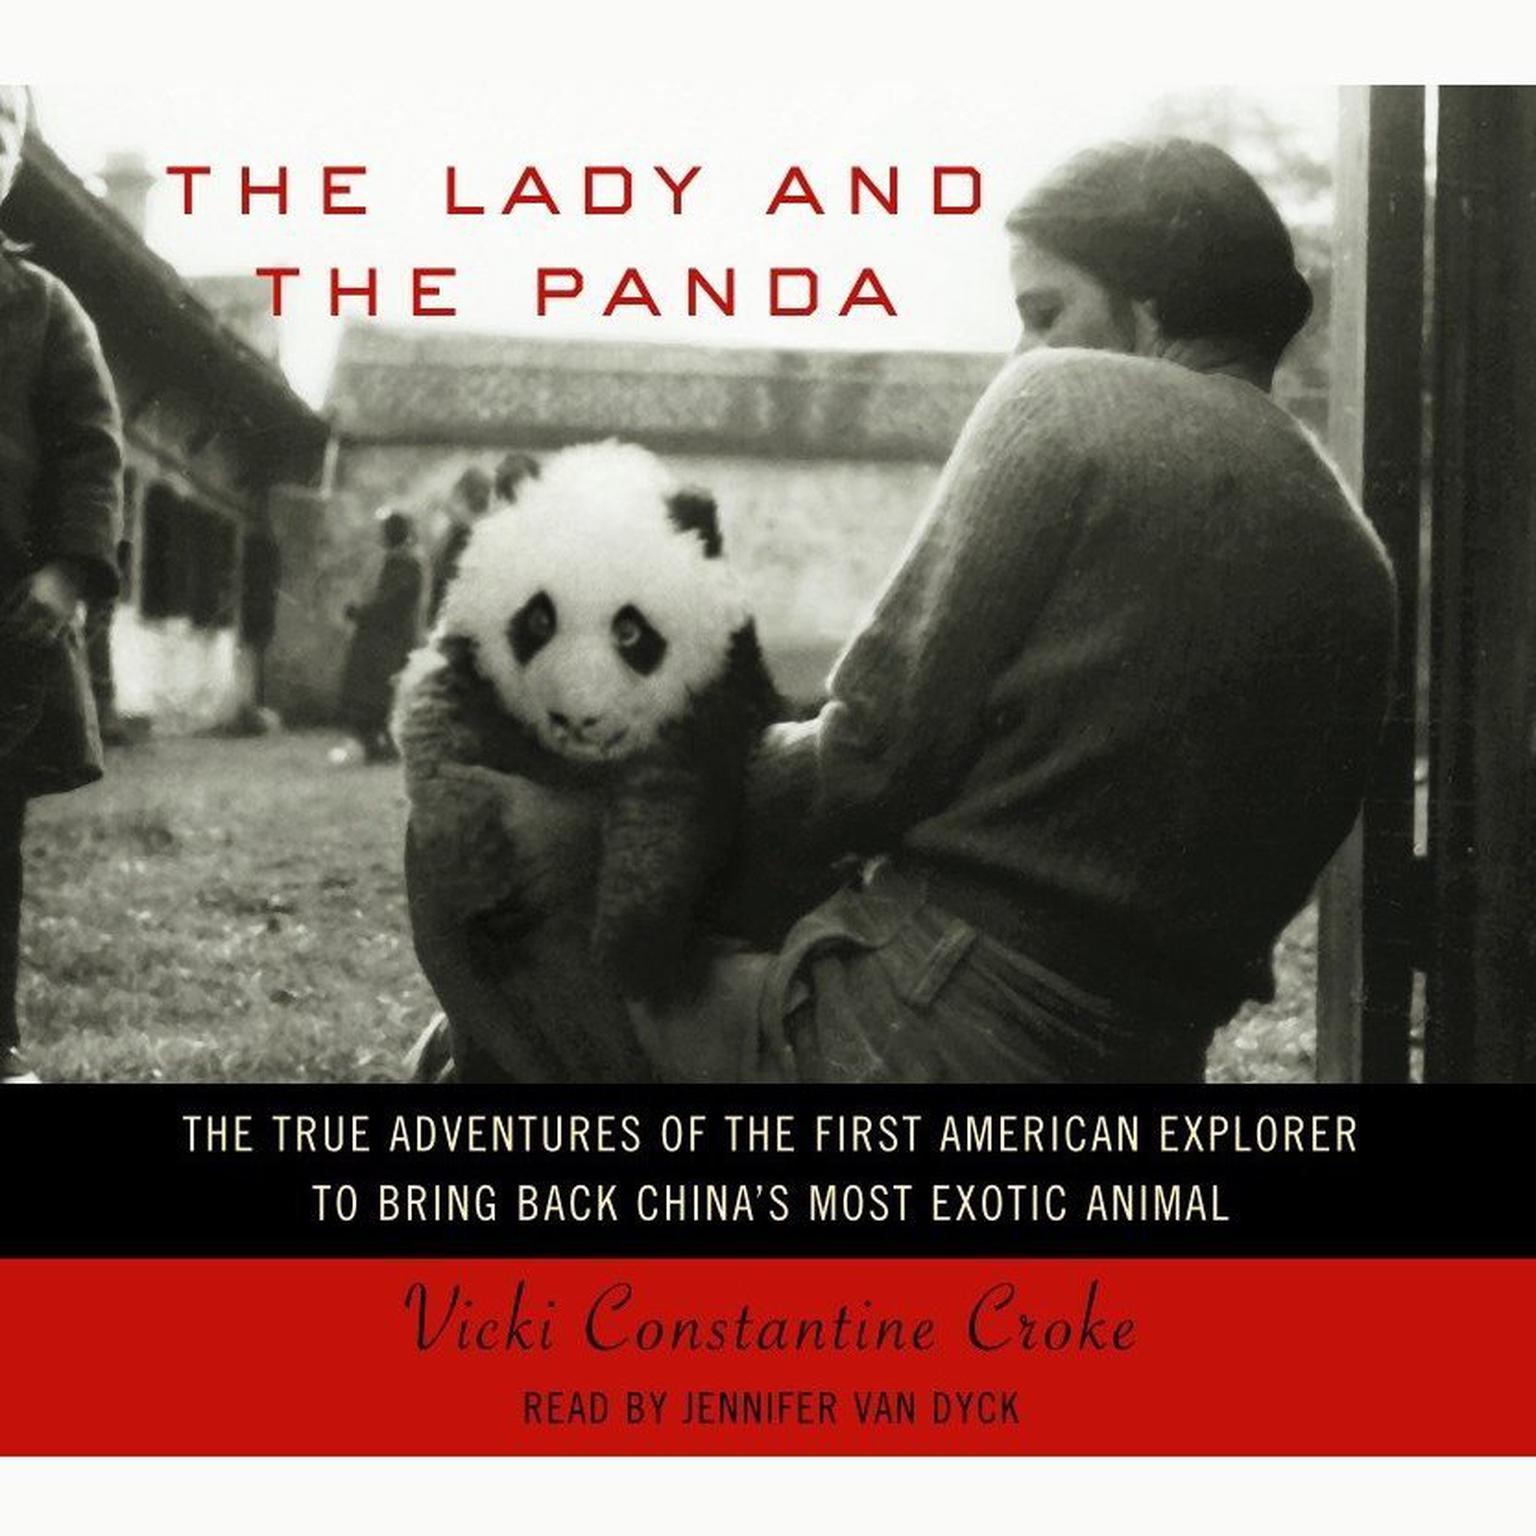 The Lady and the Panda (Abridged): The True Adventures of the First American Explorer to Bring Back Chinas Most Exotic Animal Audiobook, by Vicki Constantine Croke